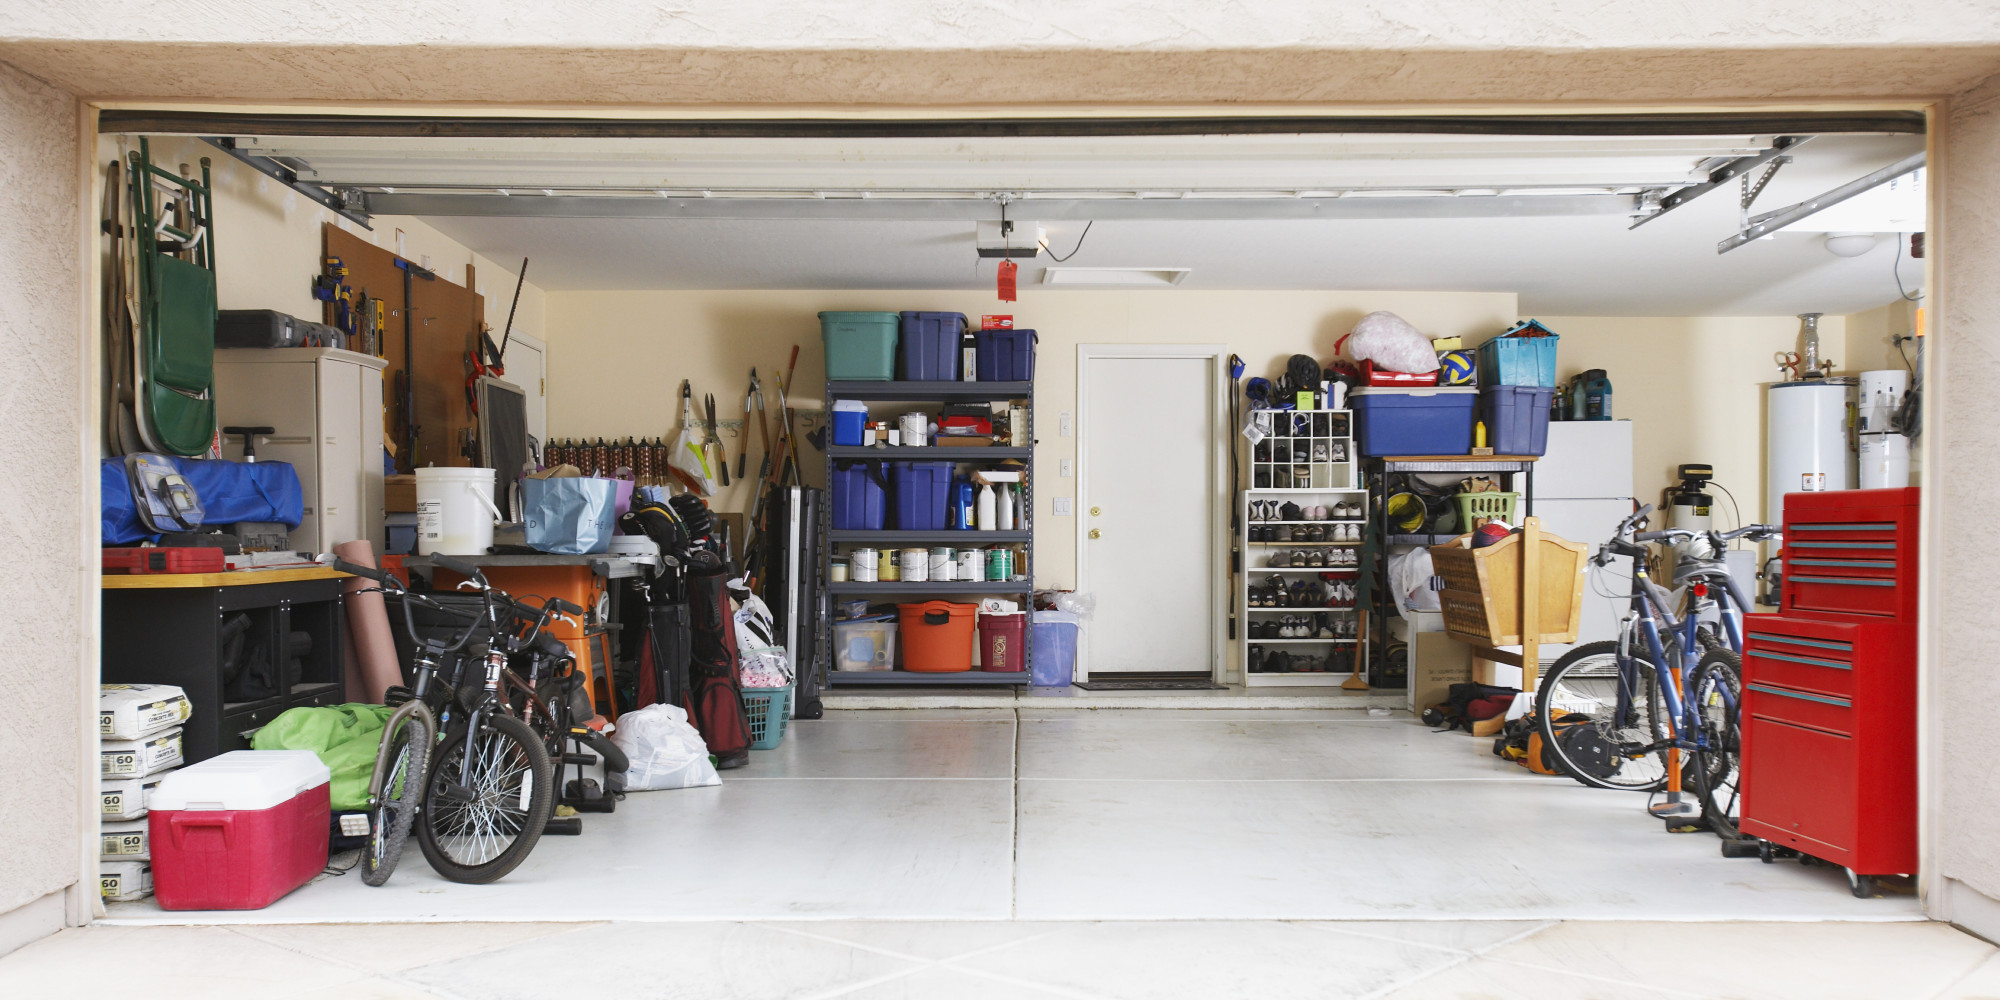 Organized Garage Images
 How To Organize Your Garage In No Time At All So You Can